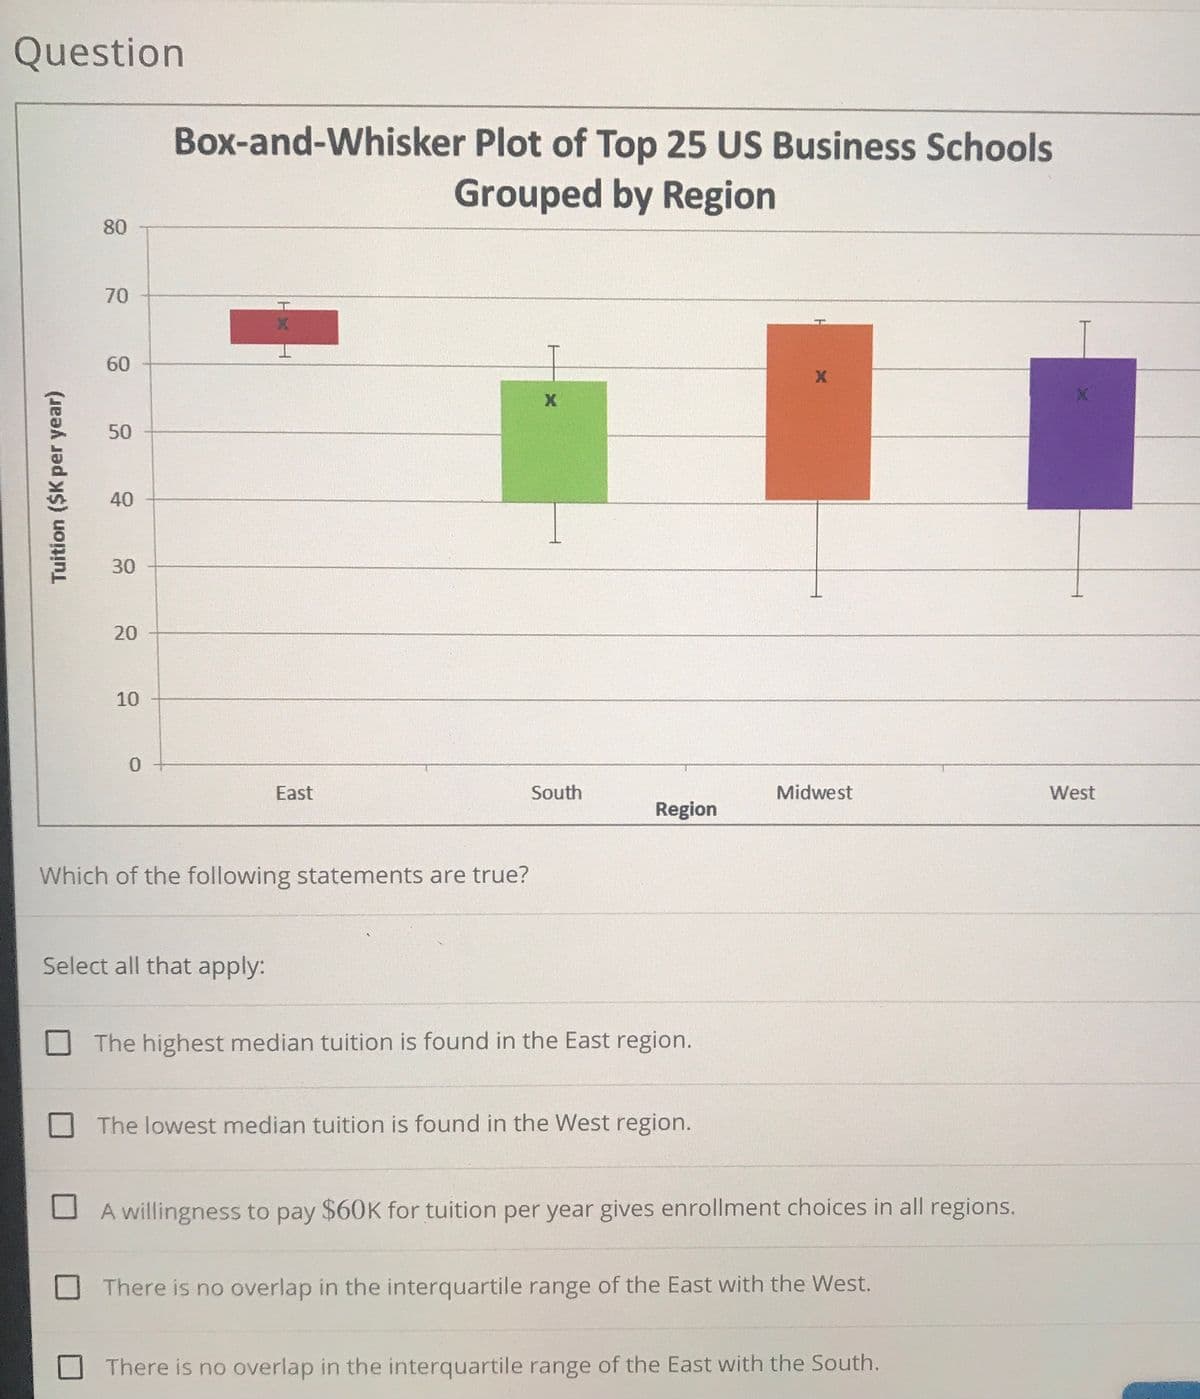 Question
Box-and-Whisker Plot of Top 25 US Business Schools
Grouped by Region
80
70
60
50
40
30
20
10
East
South
Midwest
West
Region
Which of the following statements are true?
Select all that apply:
The highest median tuition is found in the East region.
The lowest median tuition is found in the West region.
A willingness to pay $60K for tuition per year gives enrollment choices in all regions.
There is no overlap in the interquartile range of the East with the West.
There is no overlap in the interquartile range of the East with the South.
Tuition ($K per year)
